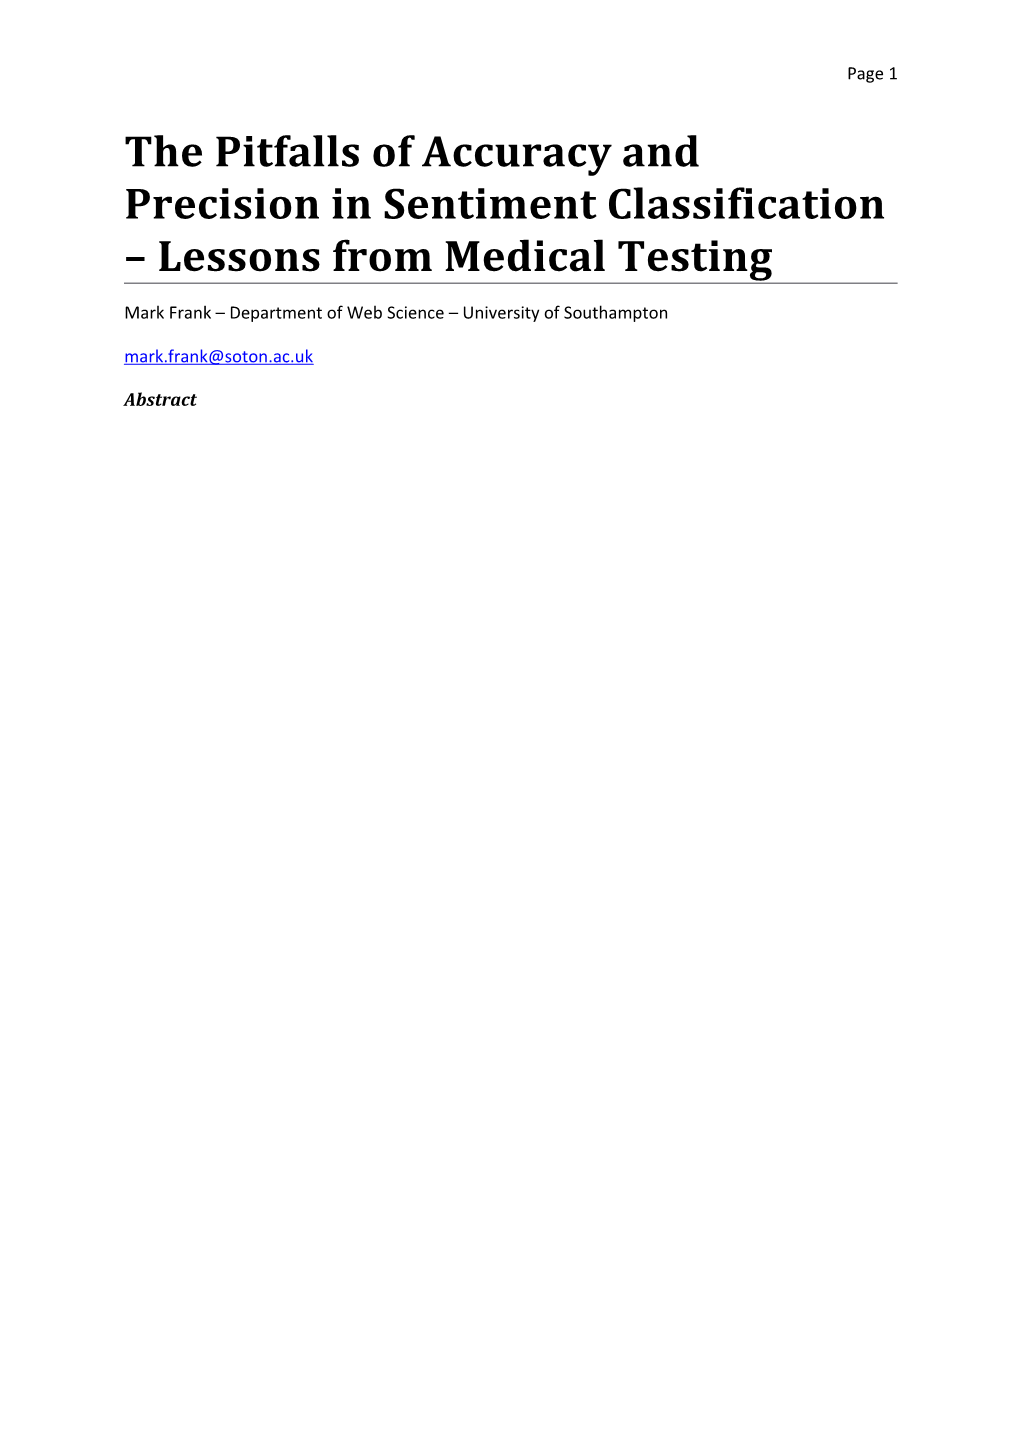 The Pitfalls of Accuracy and Precision Insentiment Classification Lessons from Medical Testing